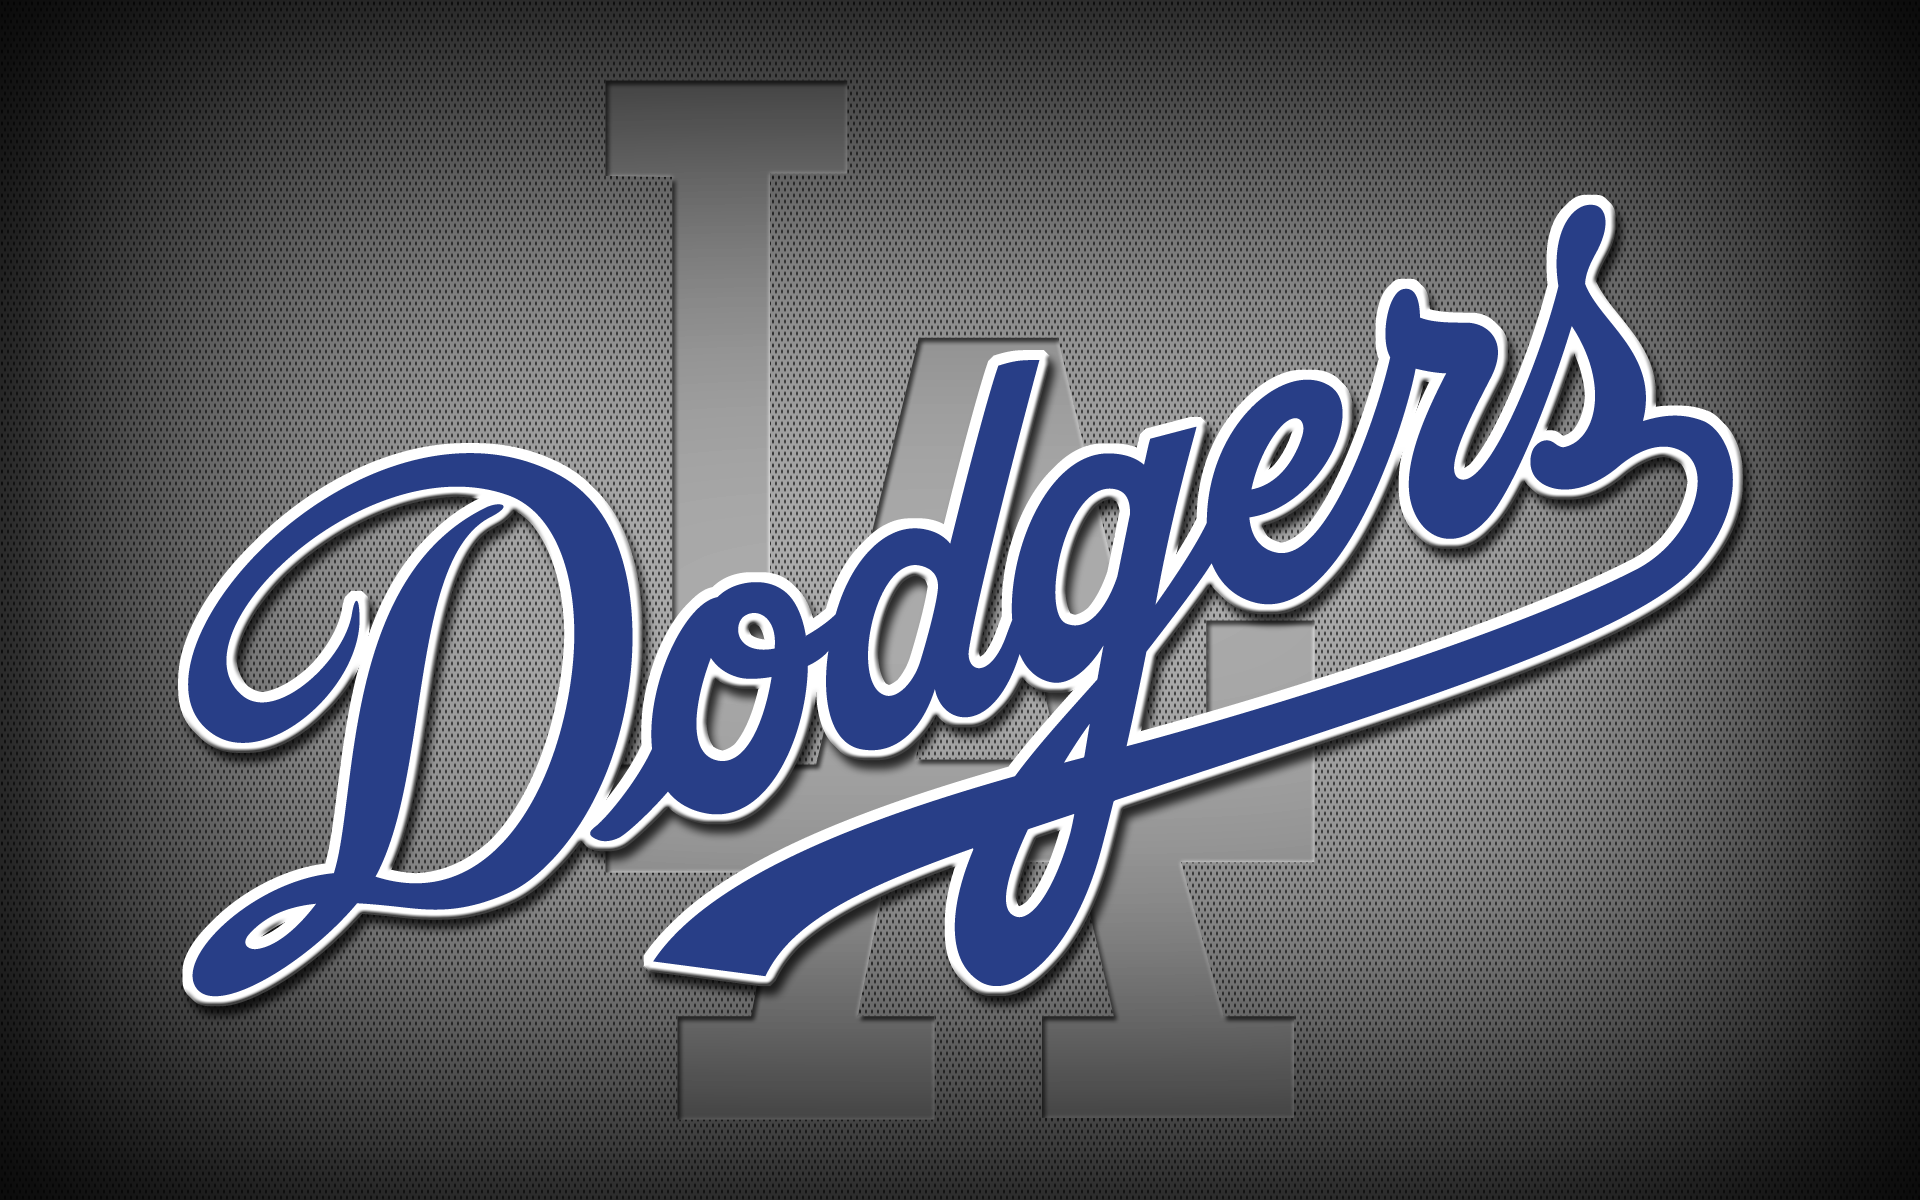 Los Angeles Dodgers wallpapers Los Angeles Dodgers